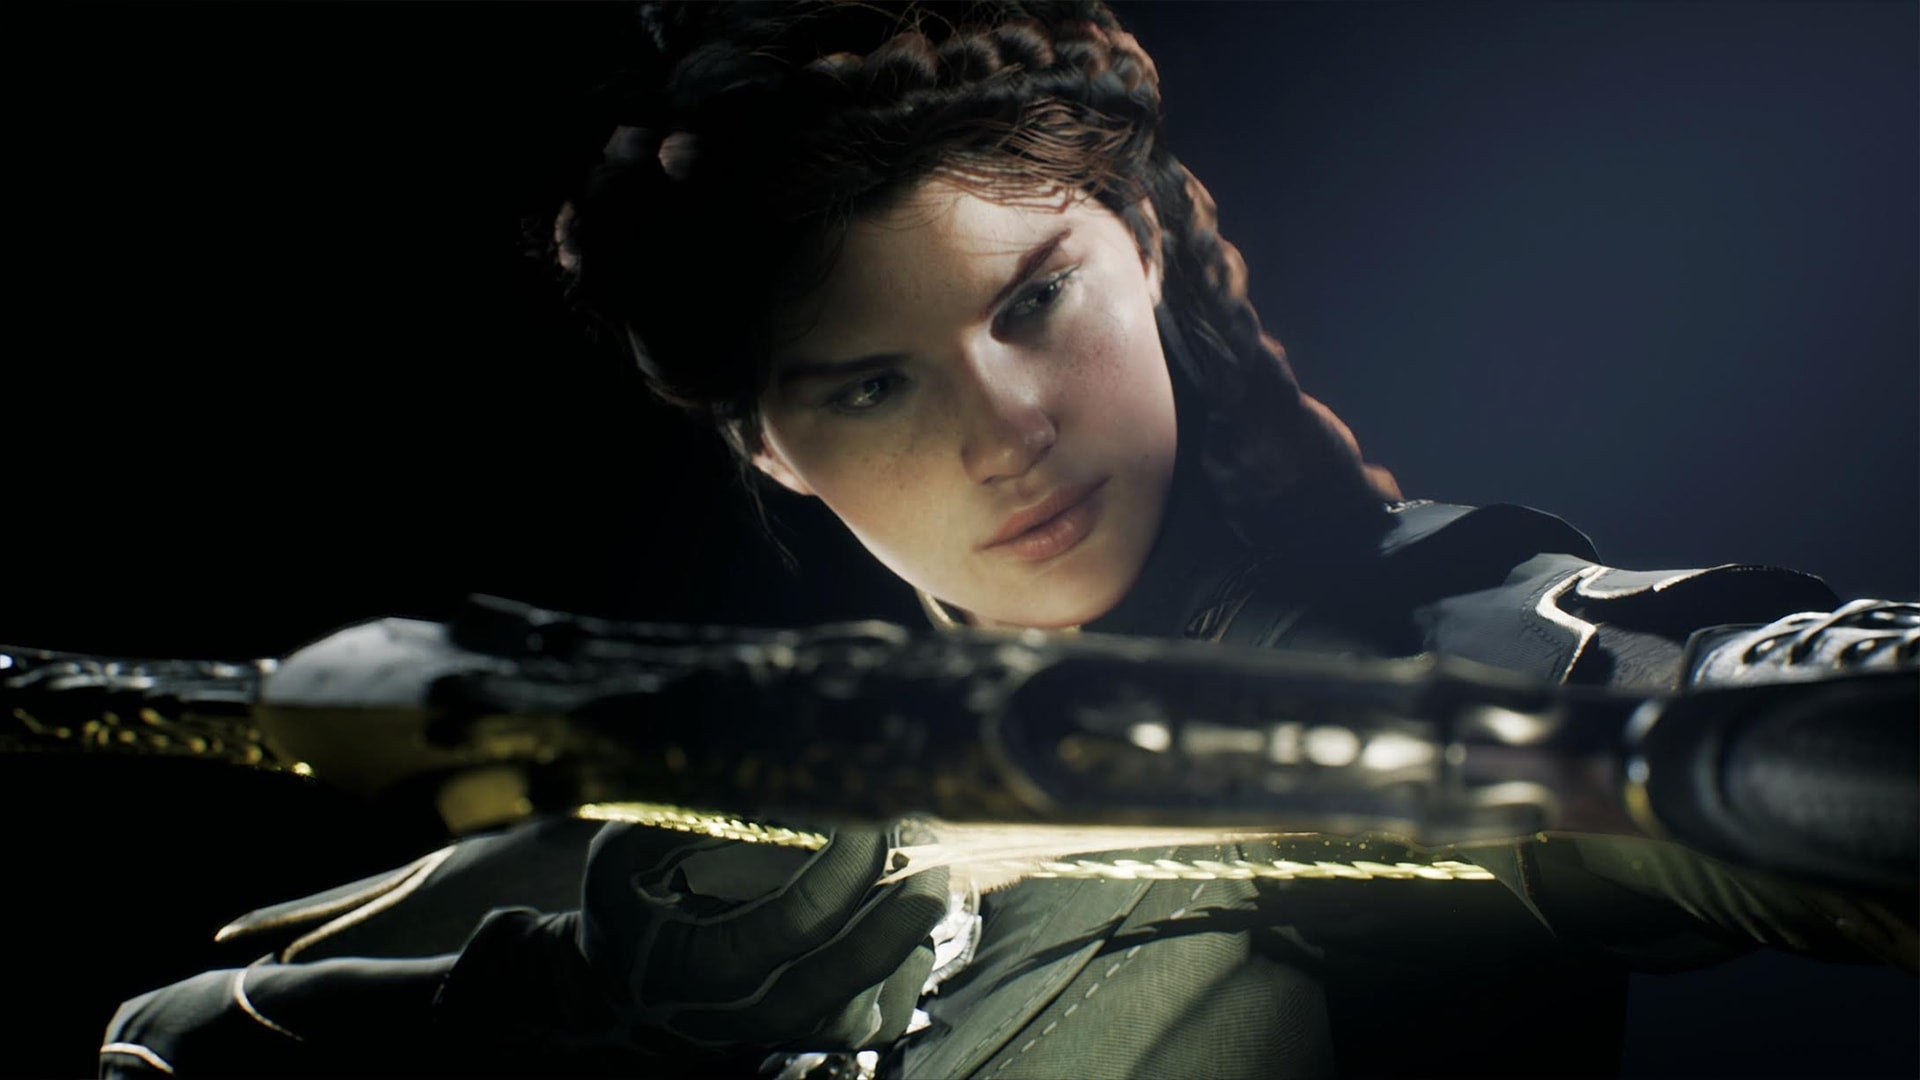 Image for Paragon PS4 Pro: Enhanced for 1080p Only - Full Analysis